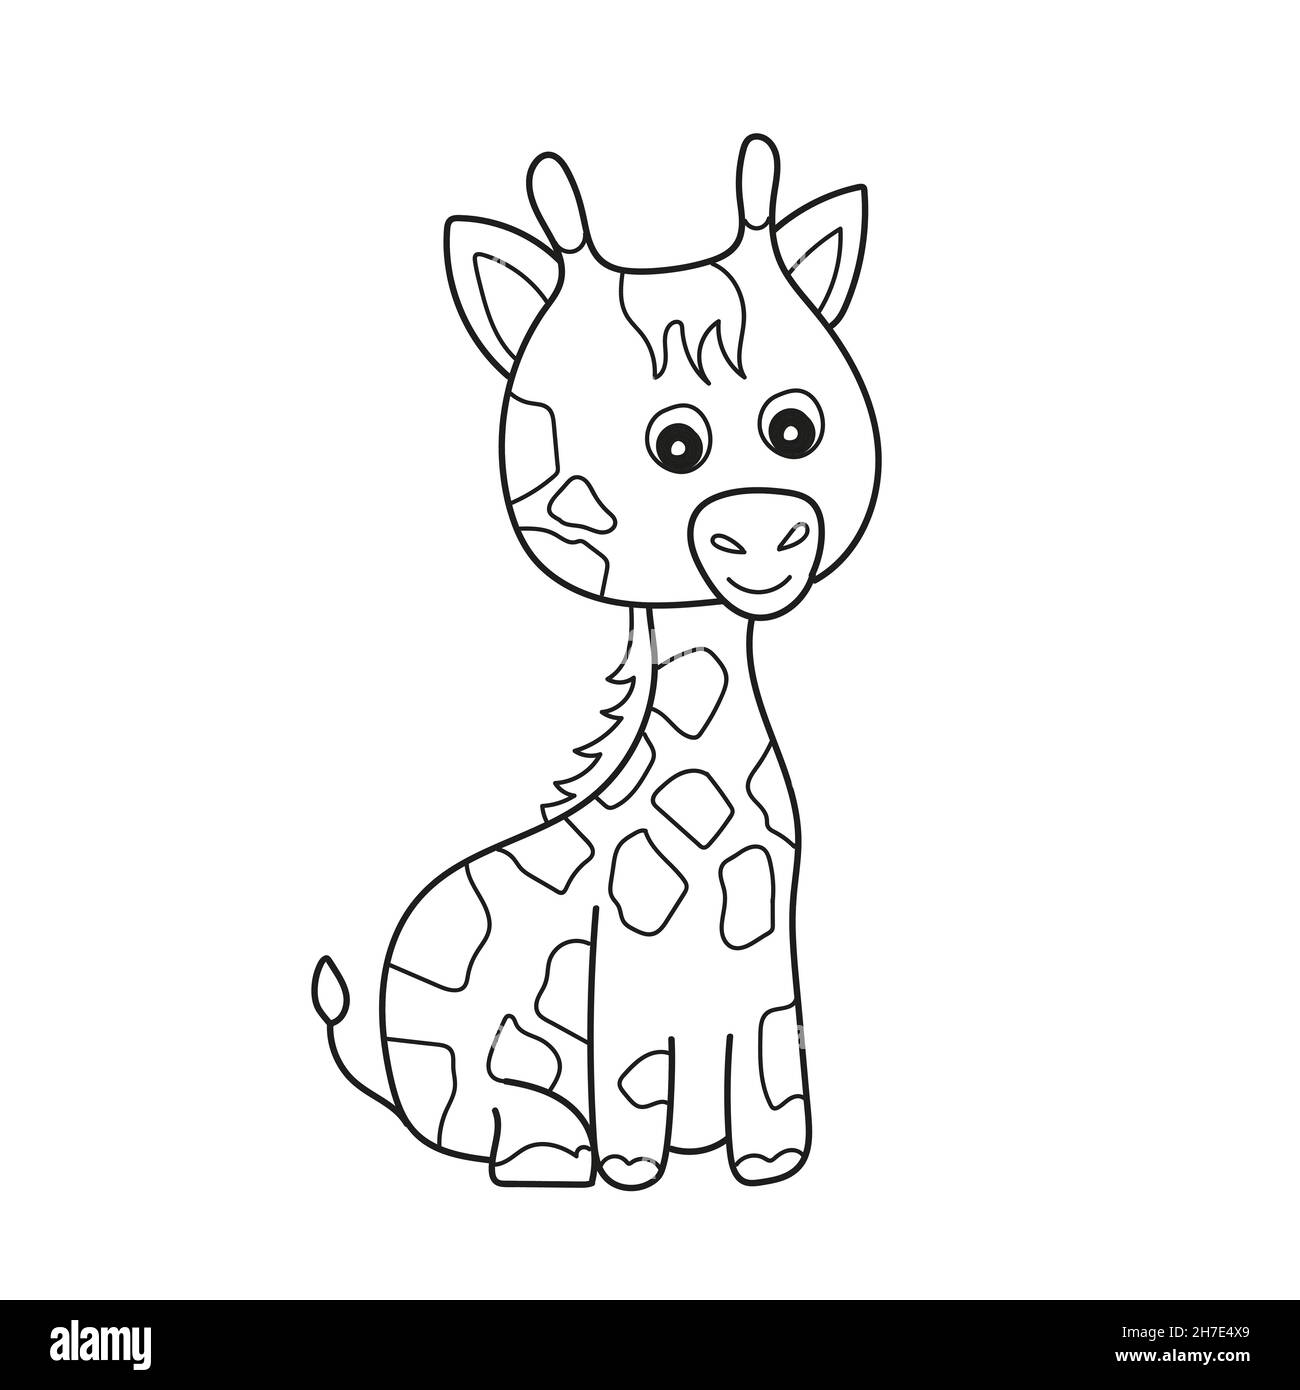 Simple coloring page. Outline clip art to color - giraffe. Black and white image. Stock Vector